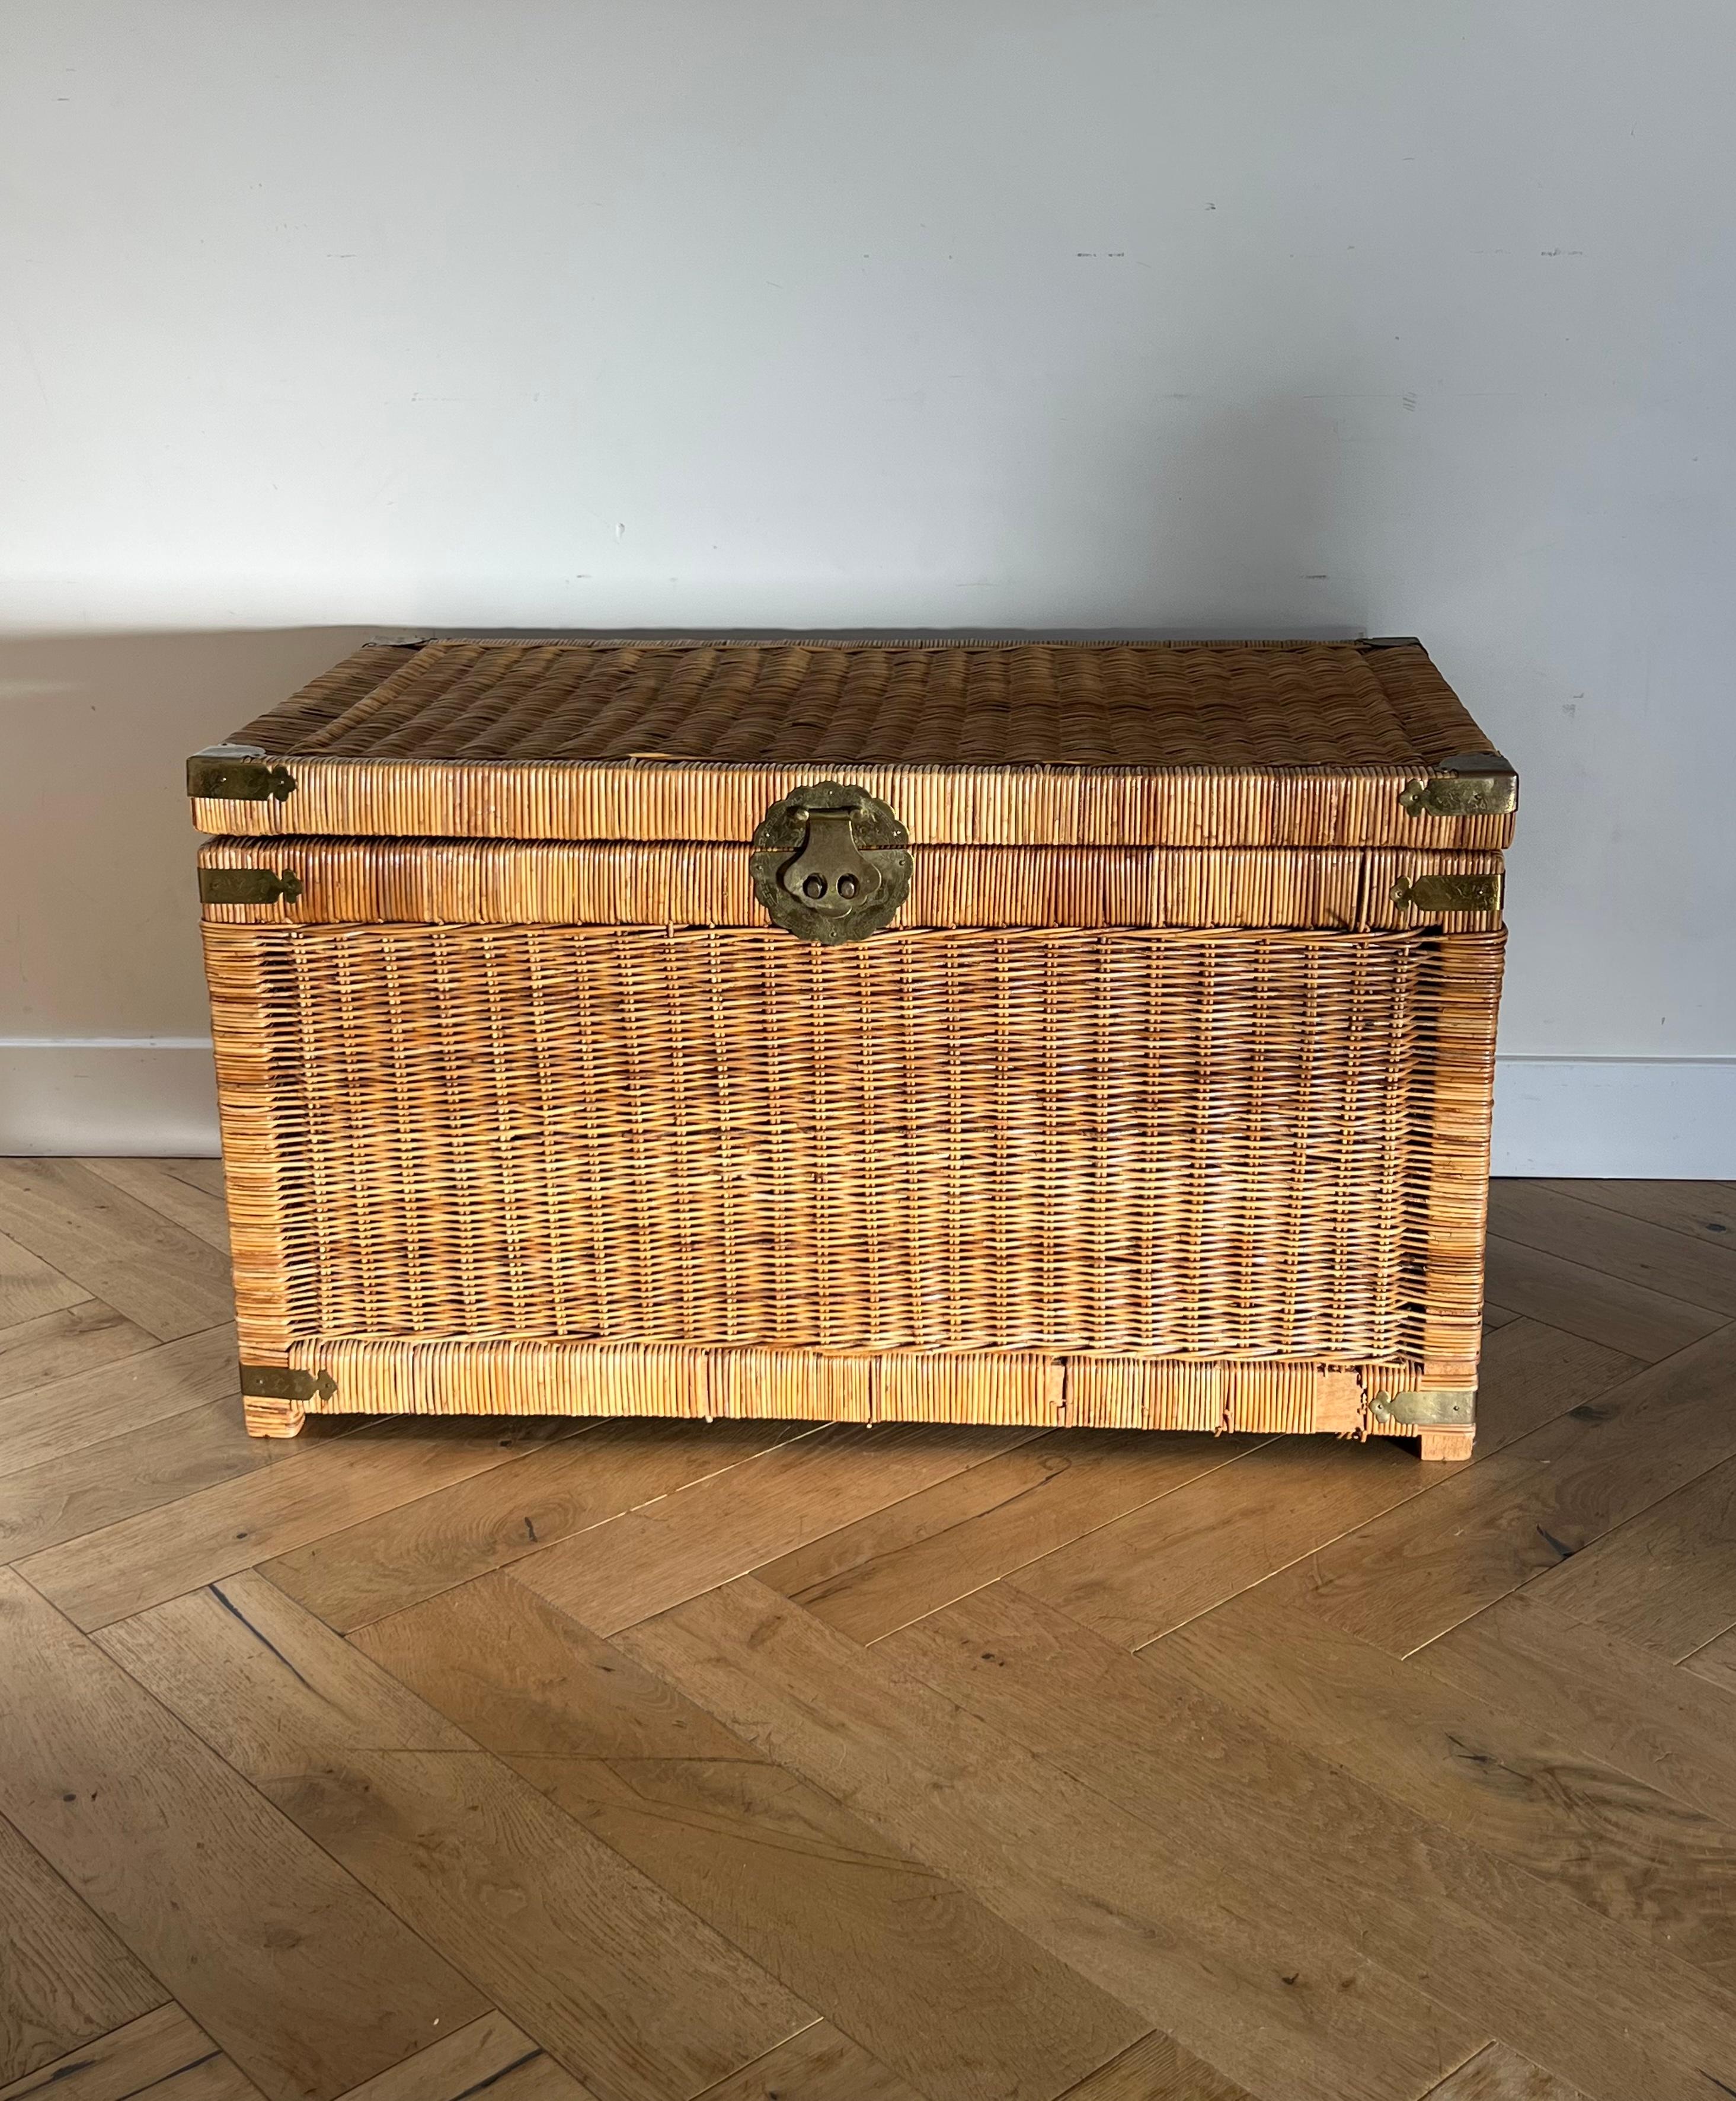 A vintage hand-woven wicker rattan chest for storage or blankets etc from south east Asia, late 20th century. Brass hardware depicts engraved birds and geometric oriental motif and symbols. Some wear and tear, such as a few “balding” spots where the